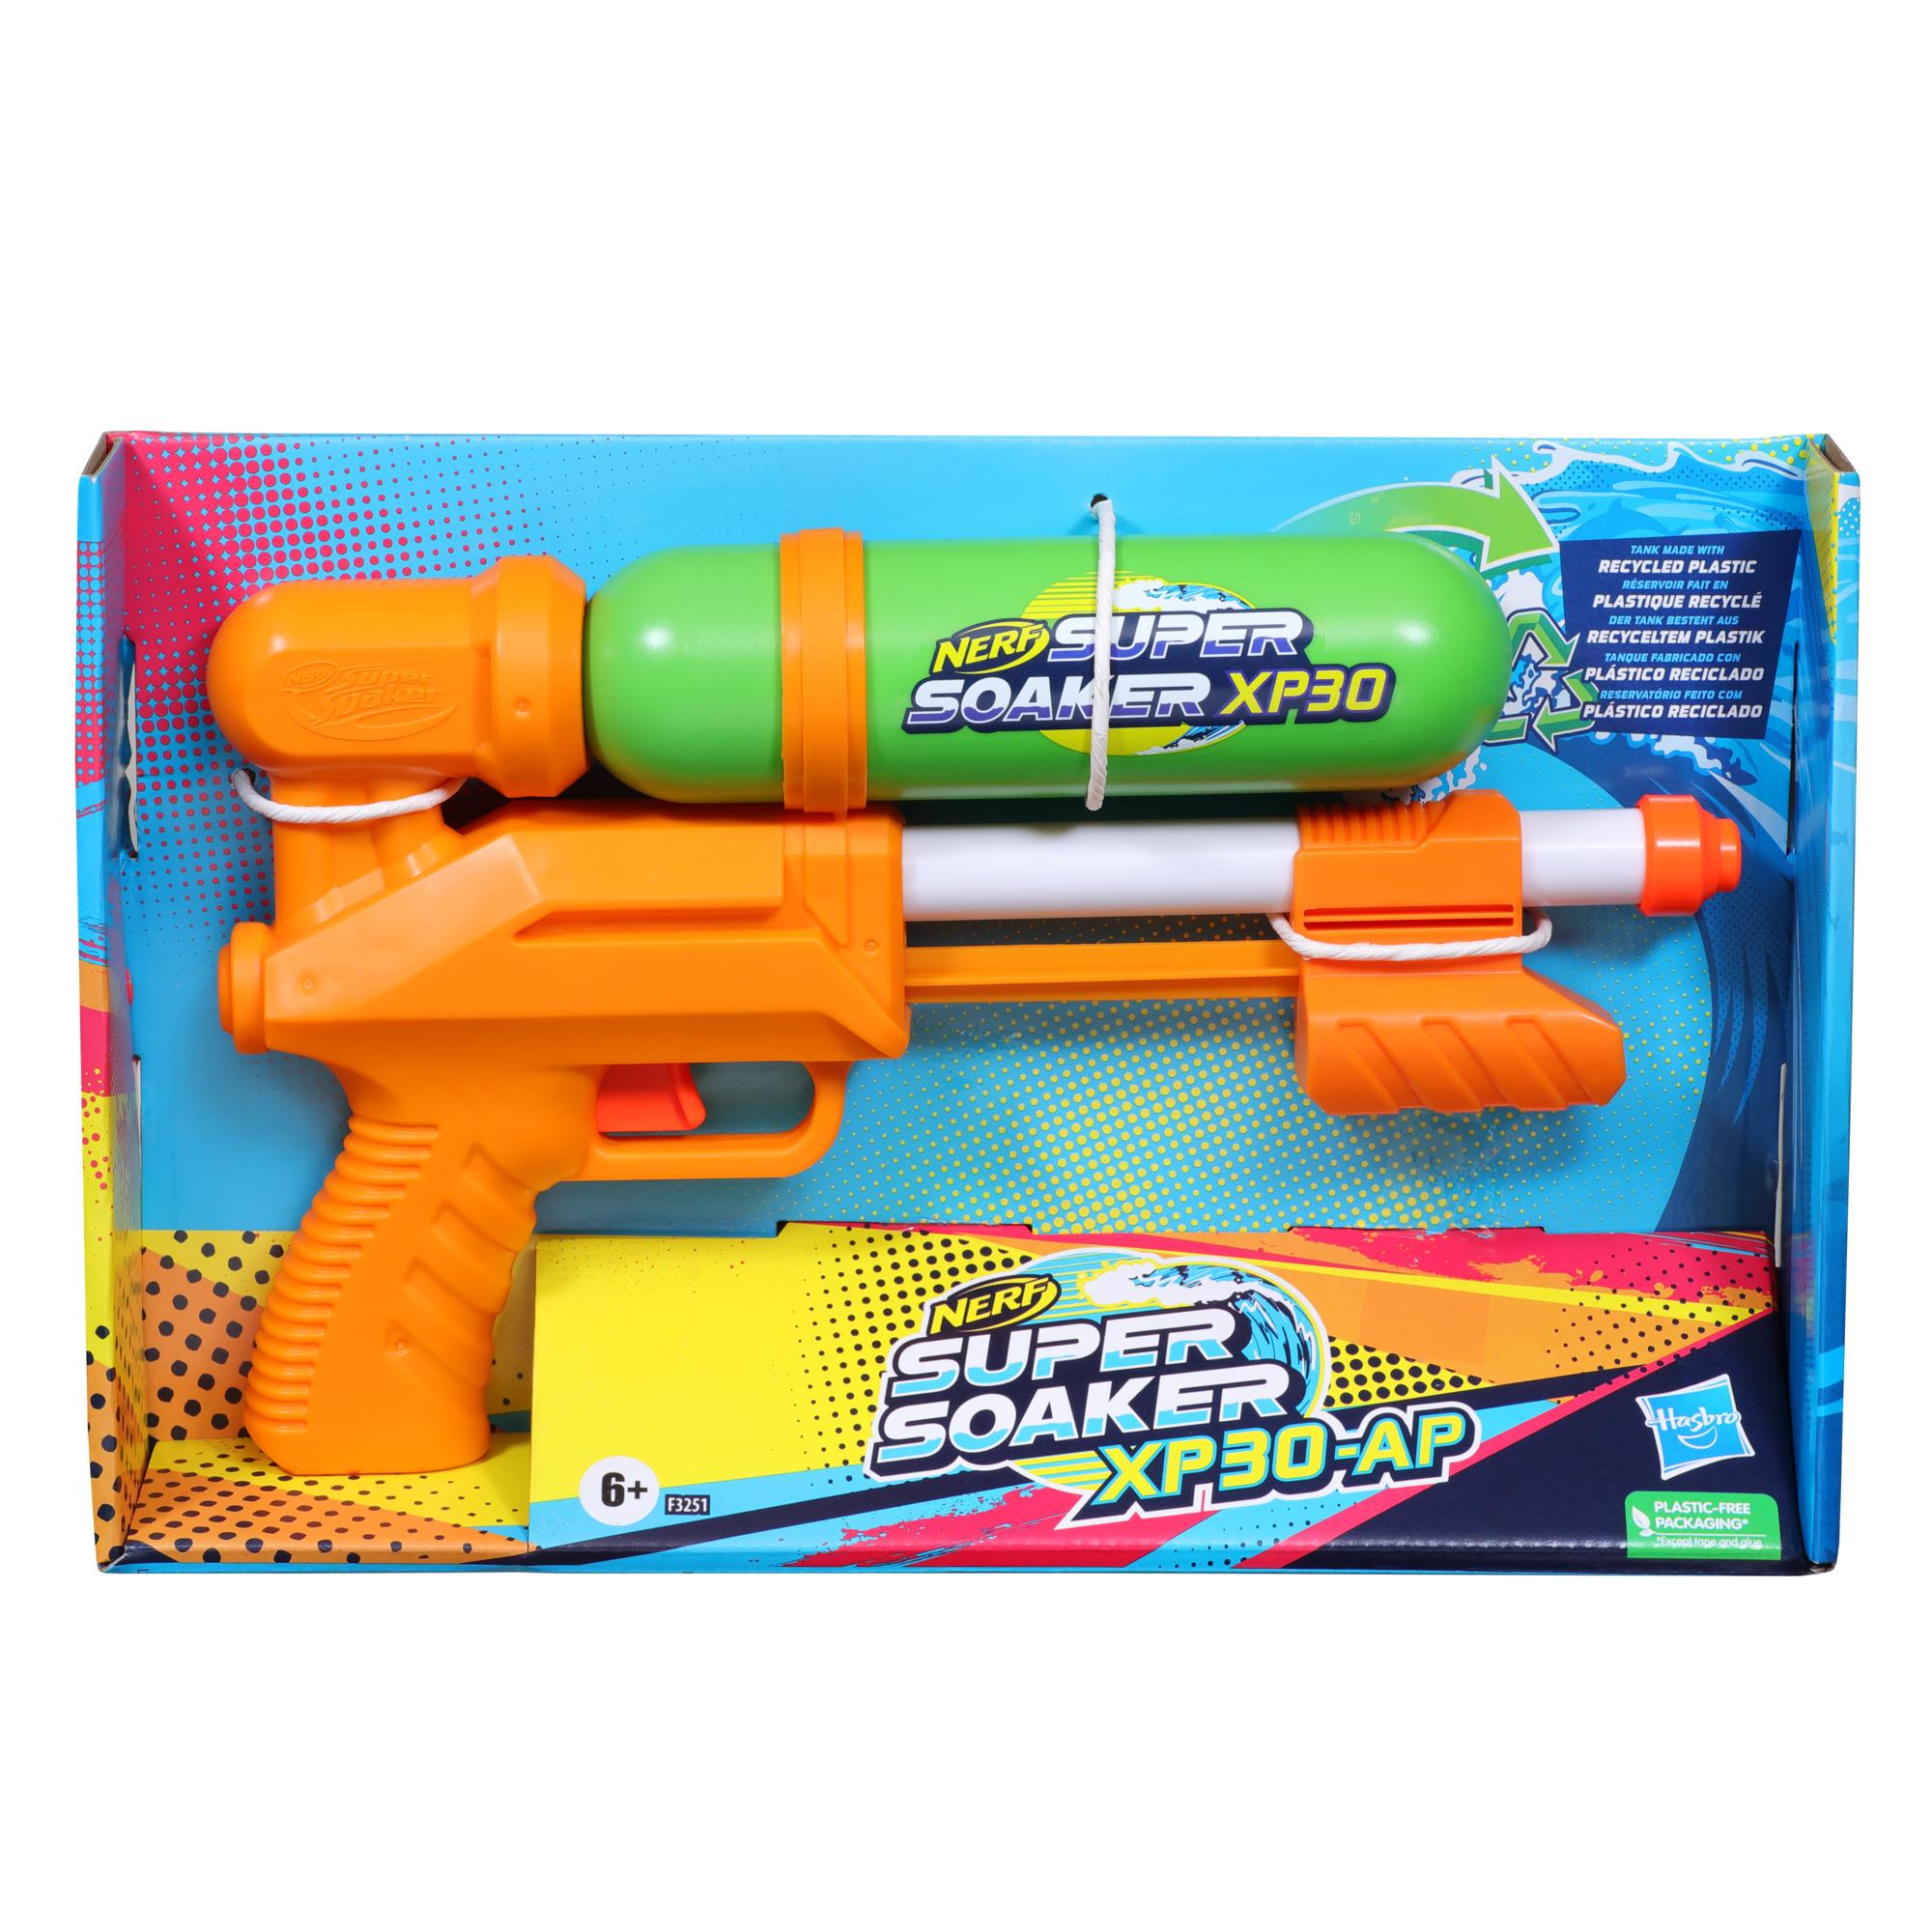 Nerf Super Soaker XP30-AP Water Blaster, Tank Made With Recycled Plastic, Air-Pressurized Continuous Water Blast